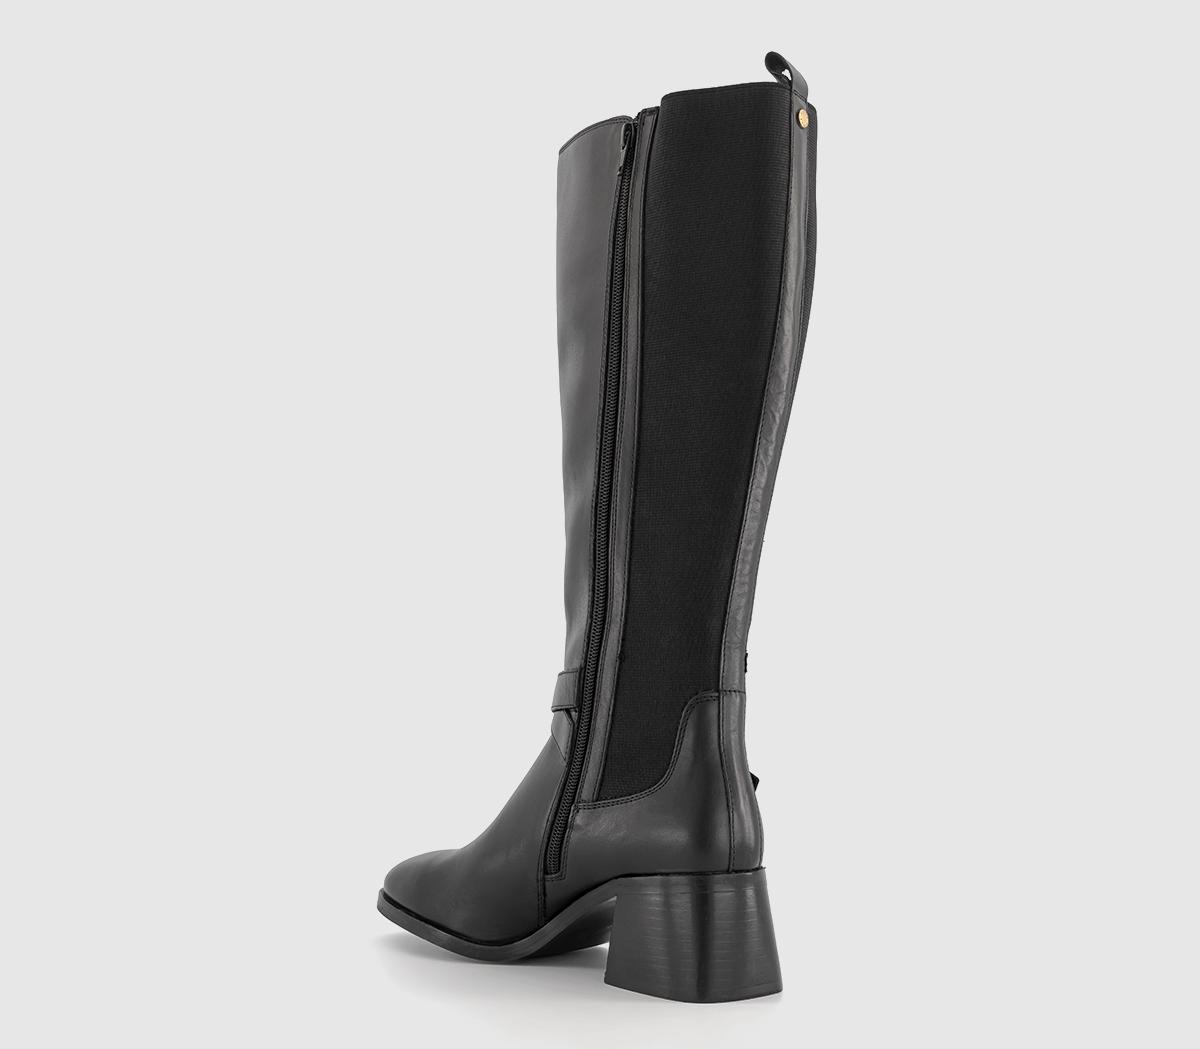 OFFICE Kaiser Buckle Strap Knee Boots Black Leather - Knee High Boots